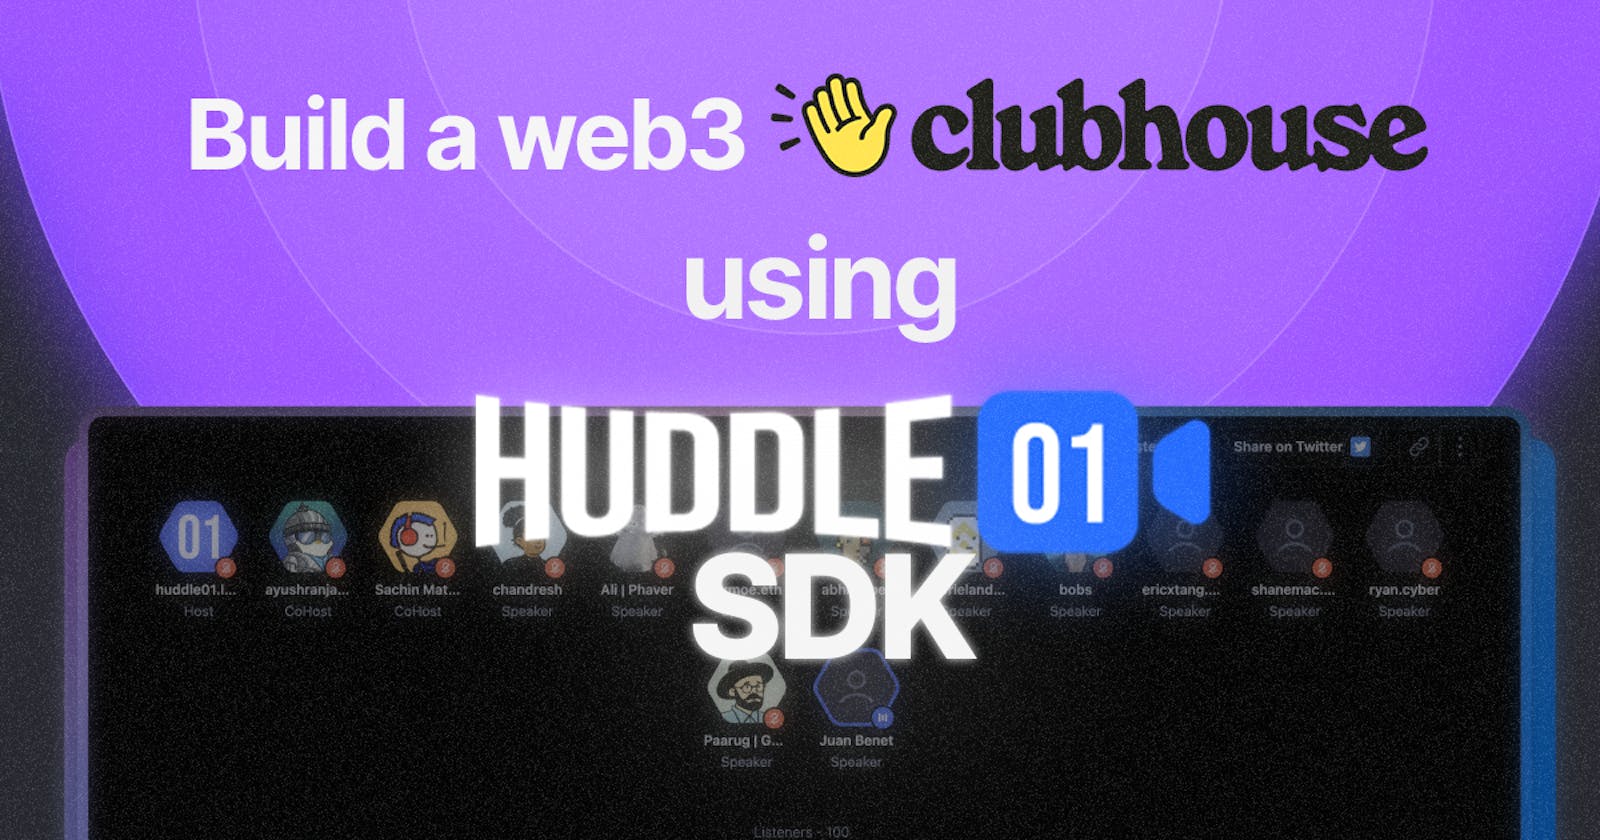 Build a web3 Clubhouse using the Huddle01 SDK